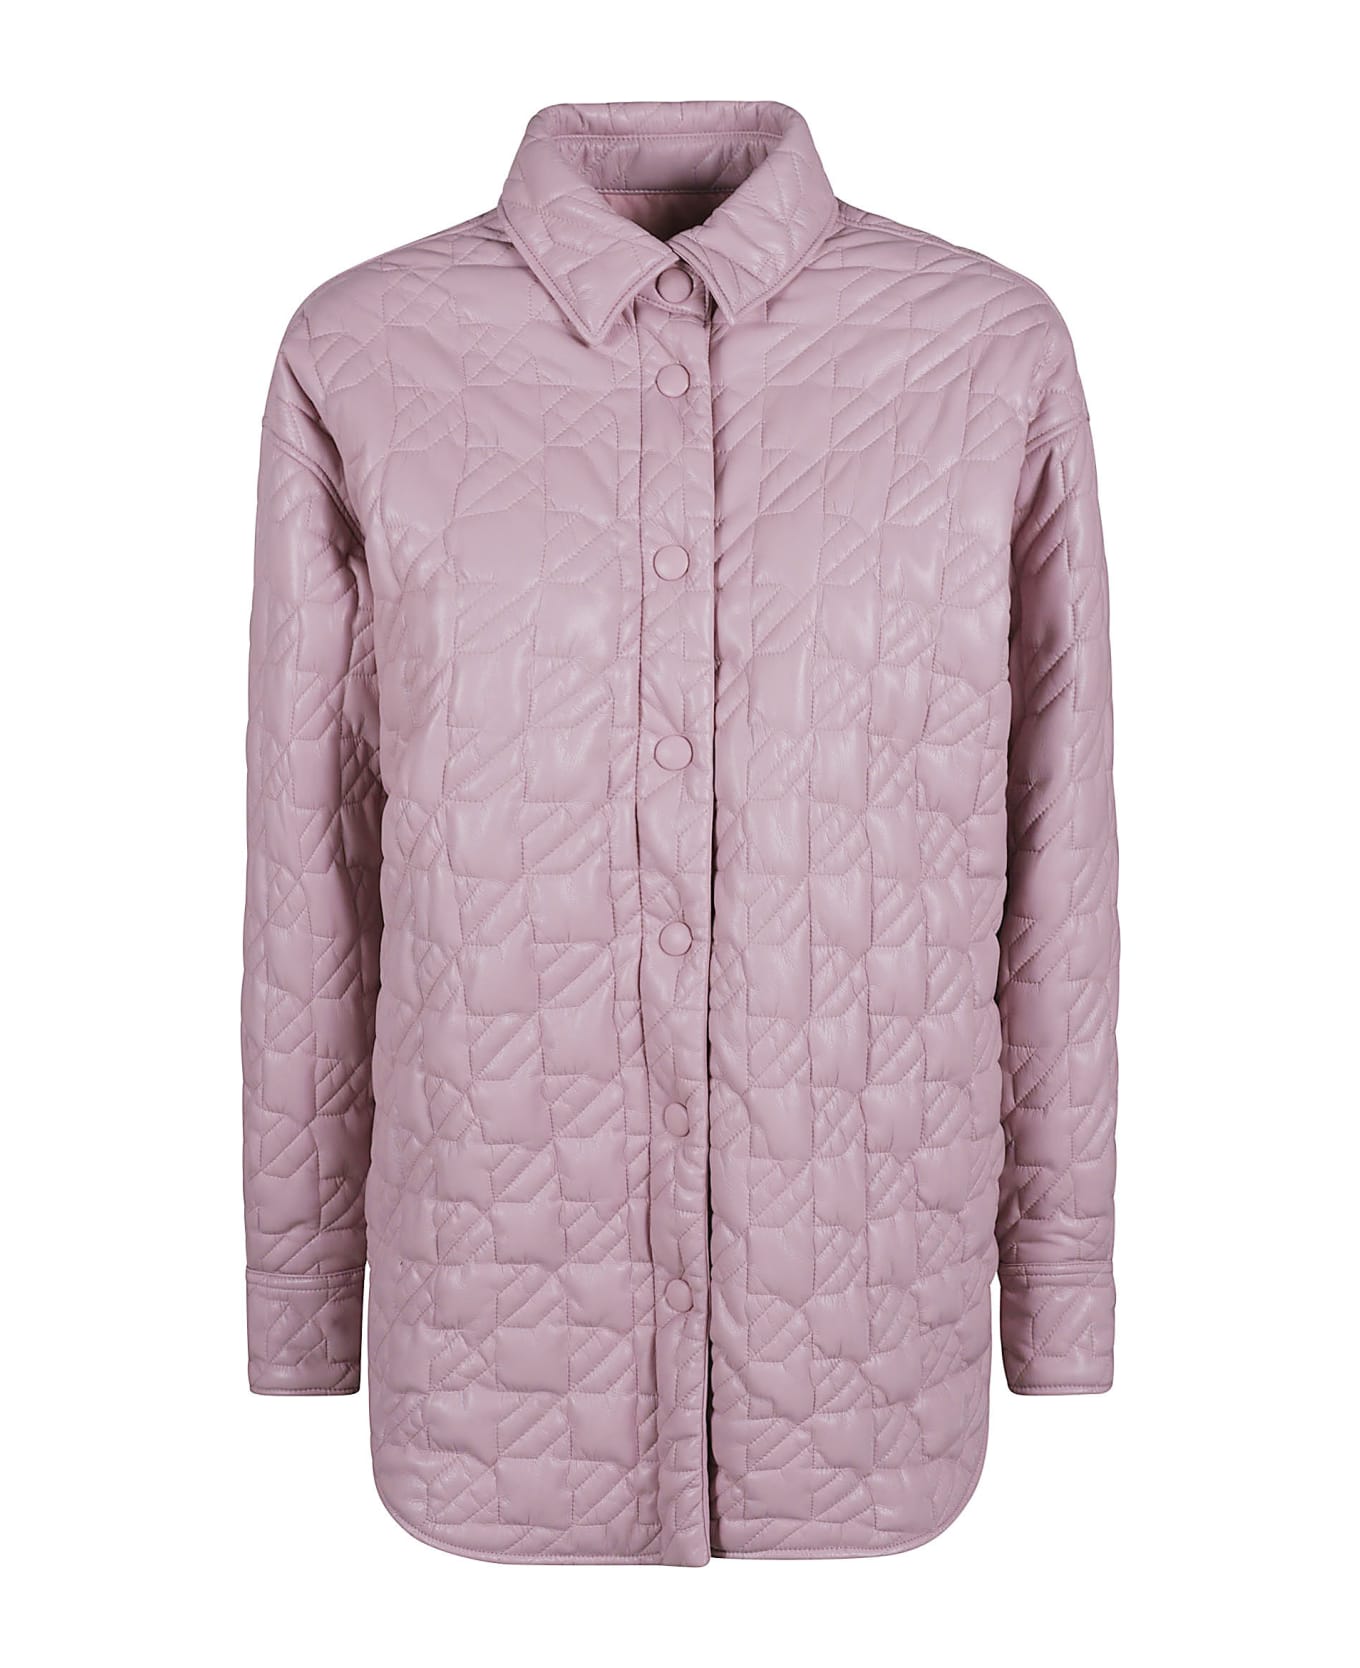 MSGM Quilted Buttoned Jacket - Rosa